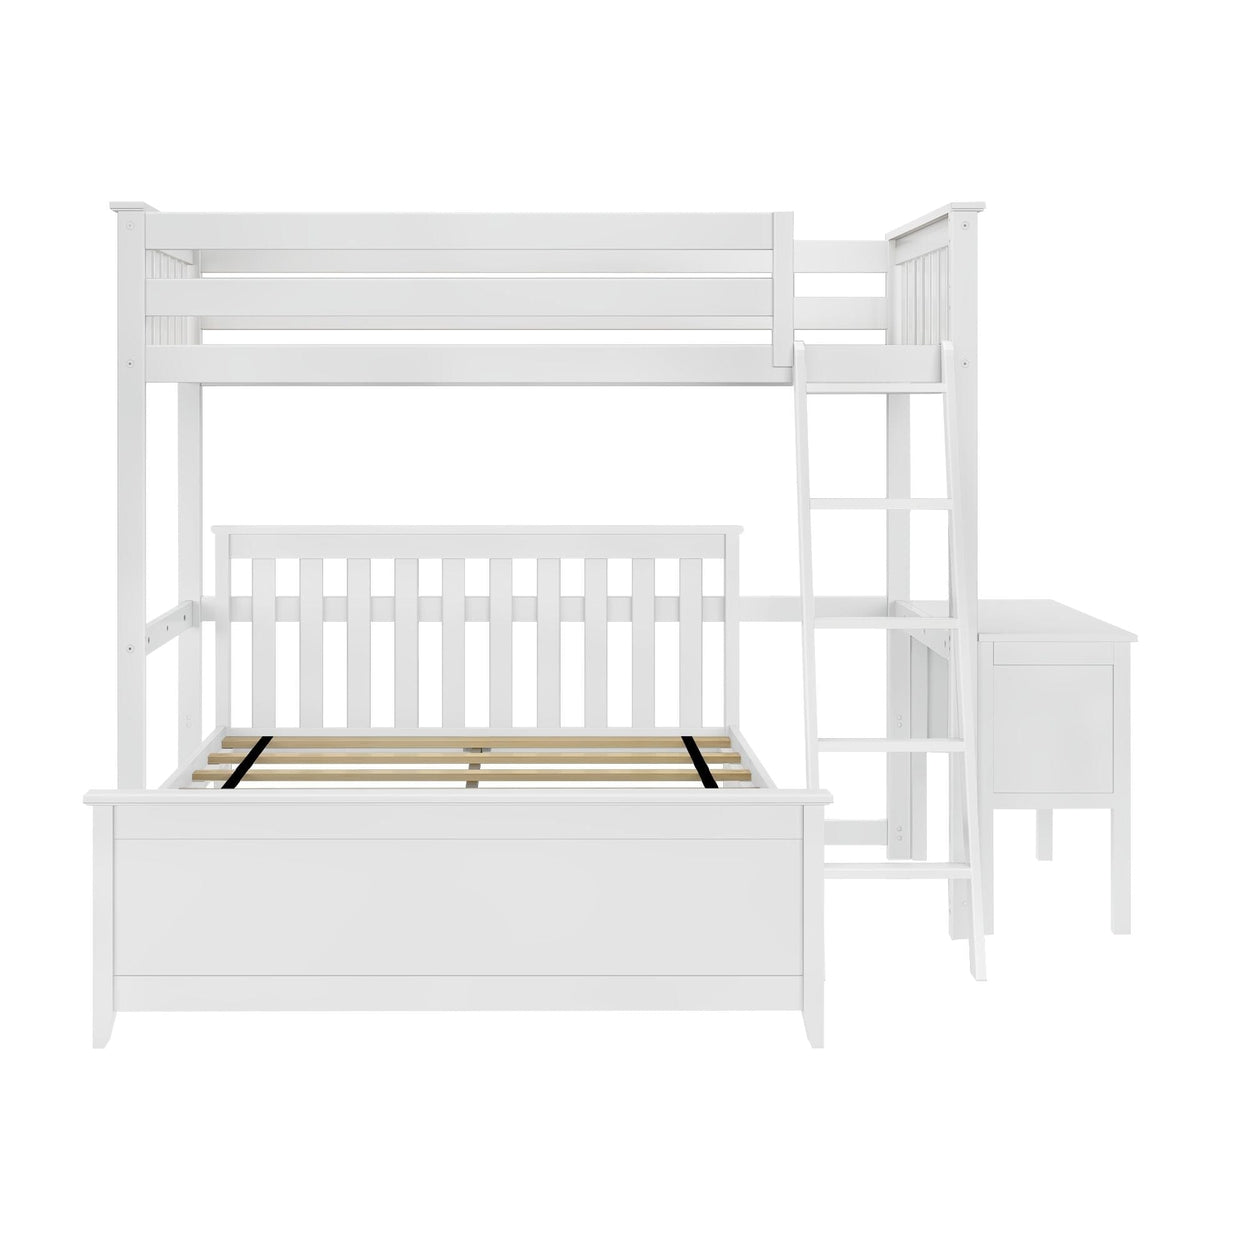 18-802-002 : Bunk Beds L-Shaped Twin over Full Bunk Bed with Desk, White